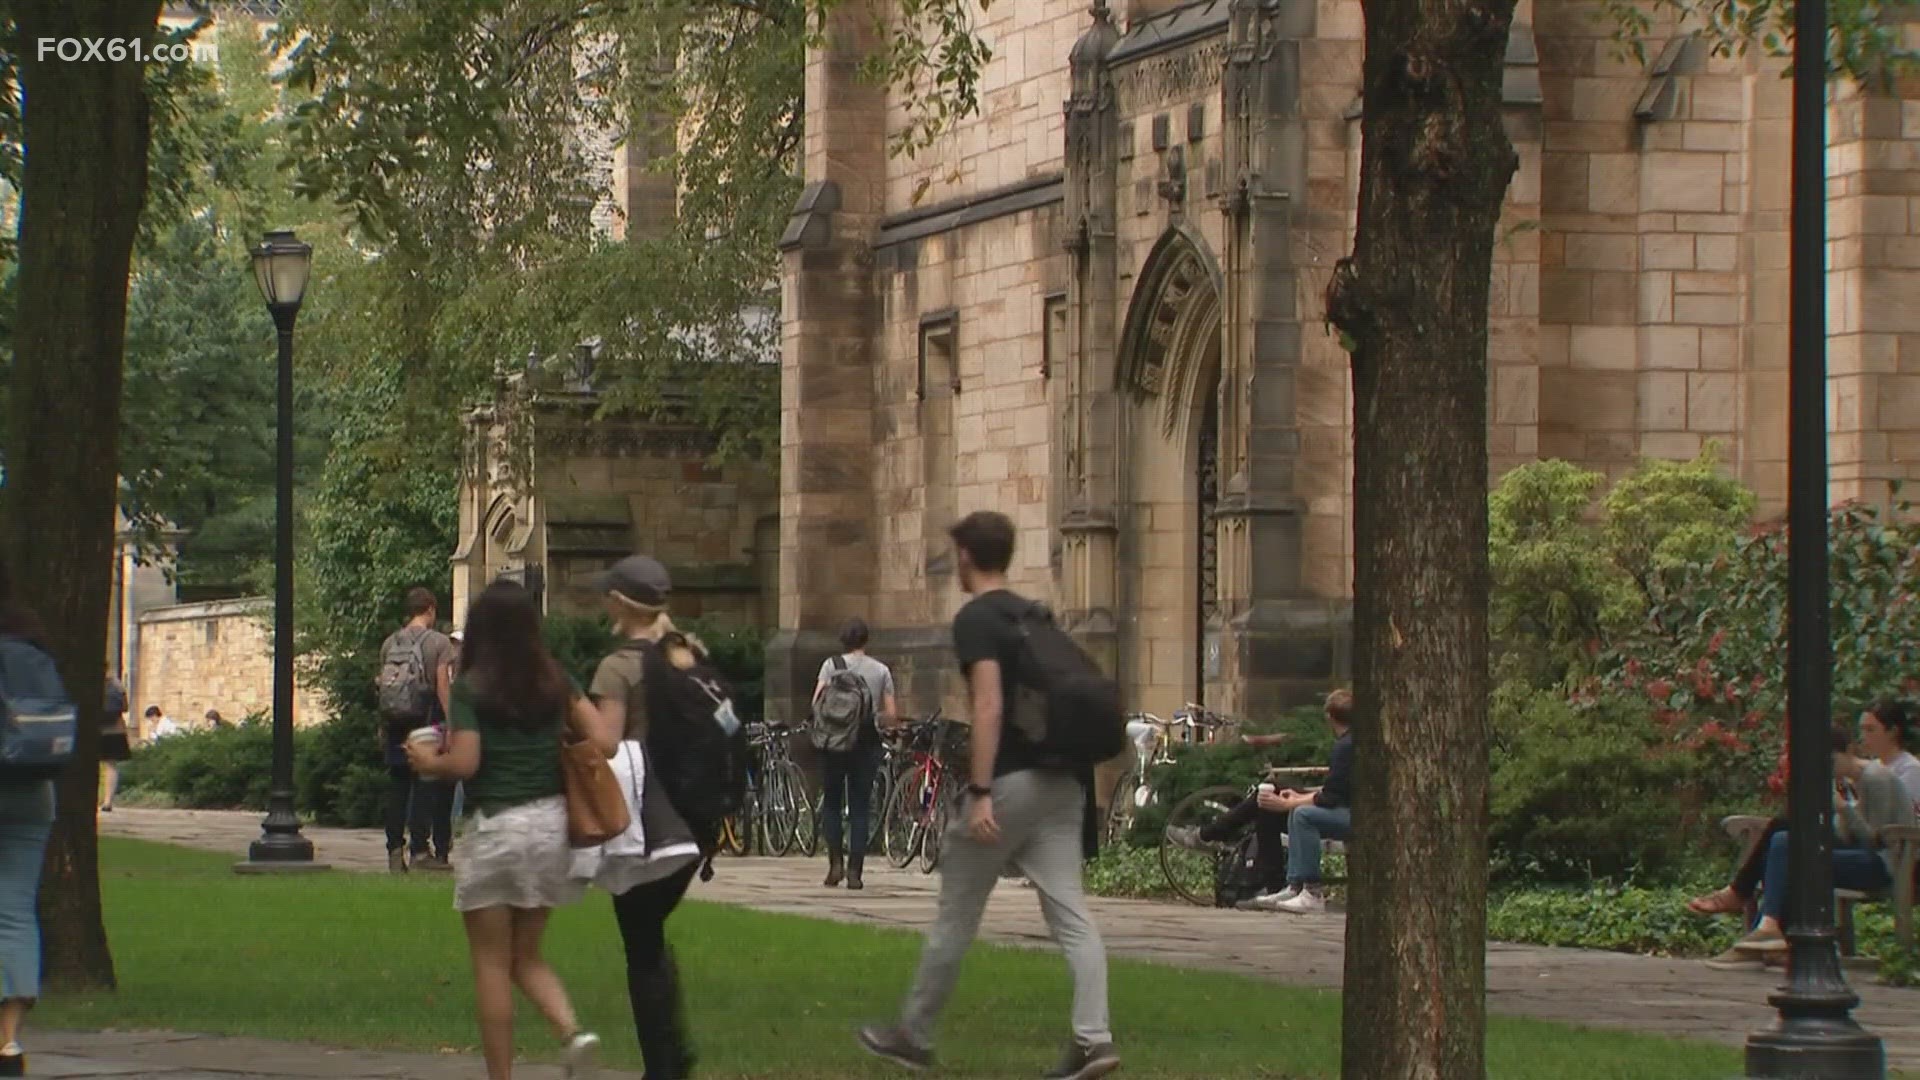 All about Yale University  Courses, fees, admissions, and more!